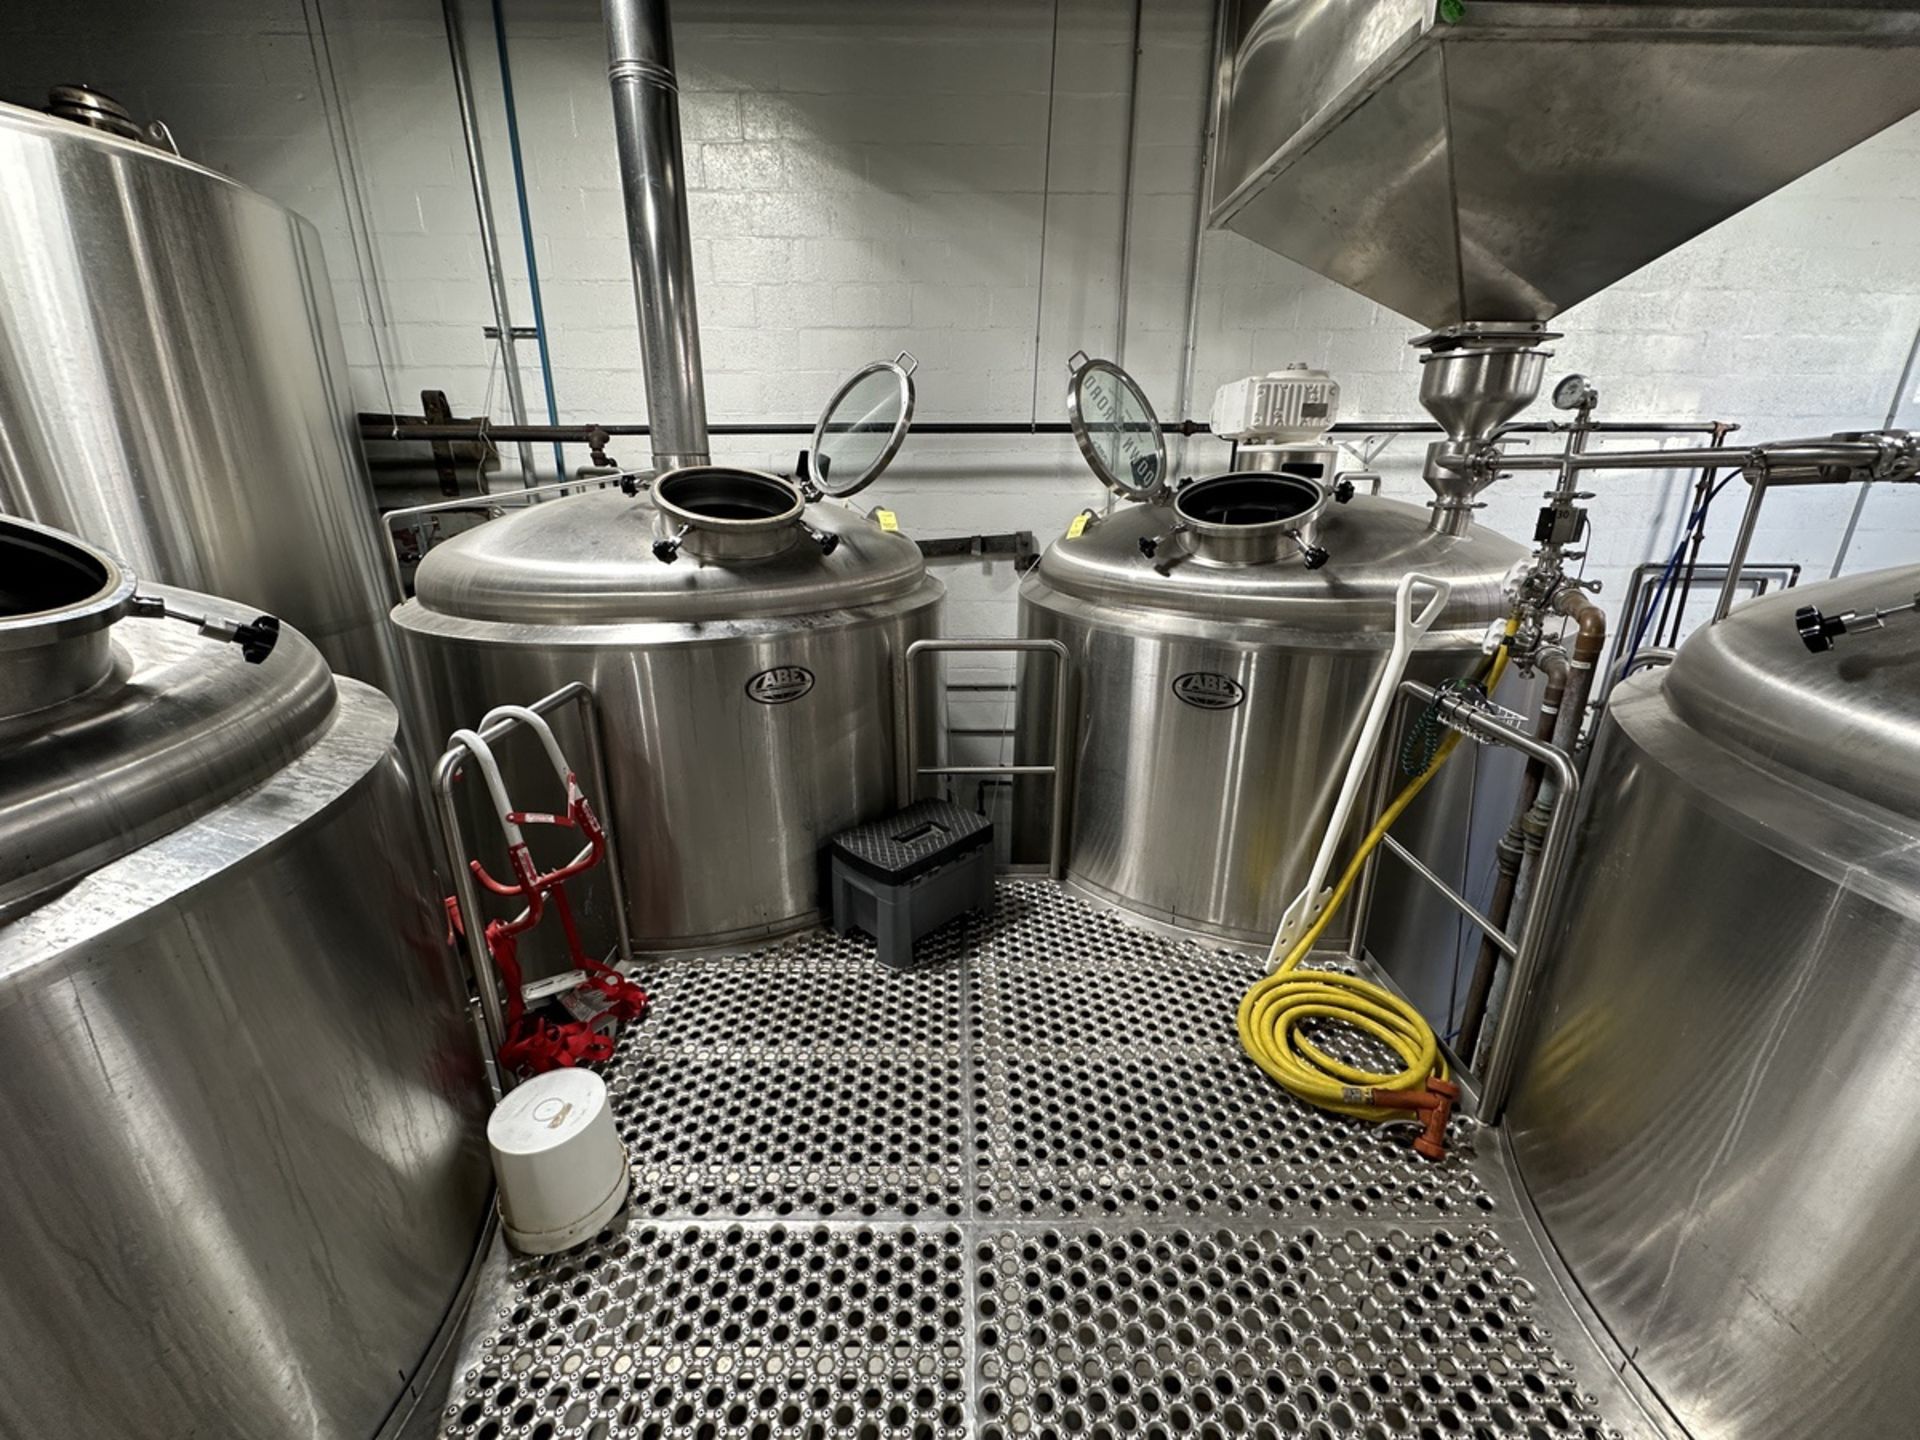 2016 ABE 30 BBL 4-Vessel Brewhouse - Brew Kettle, Mash Tun, Lauter Tun &amp; Whirlp | Rig Fee $12500 - Image 2 of 11